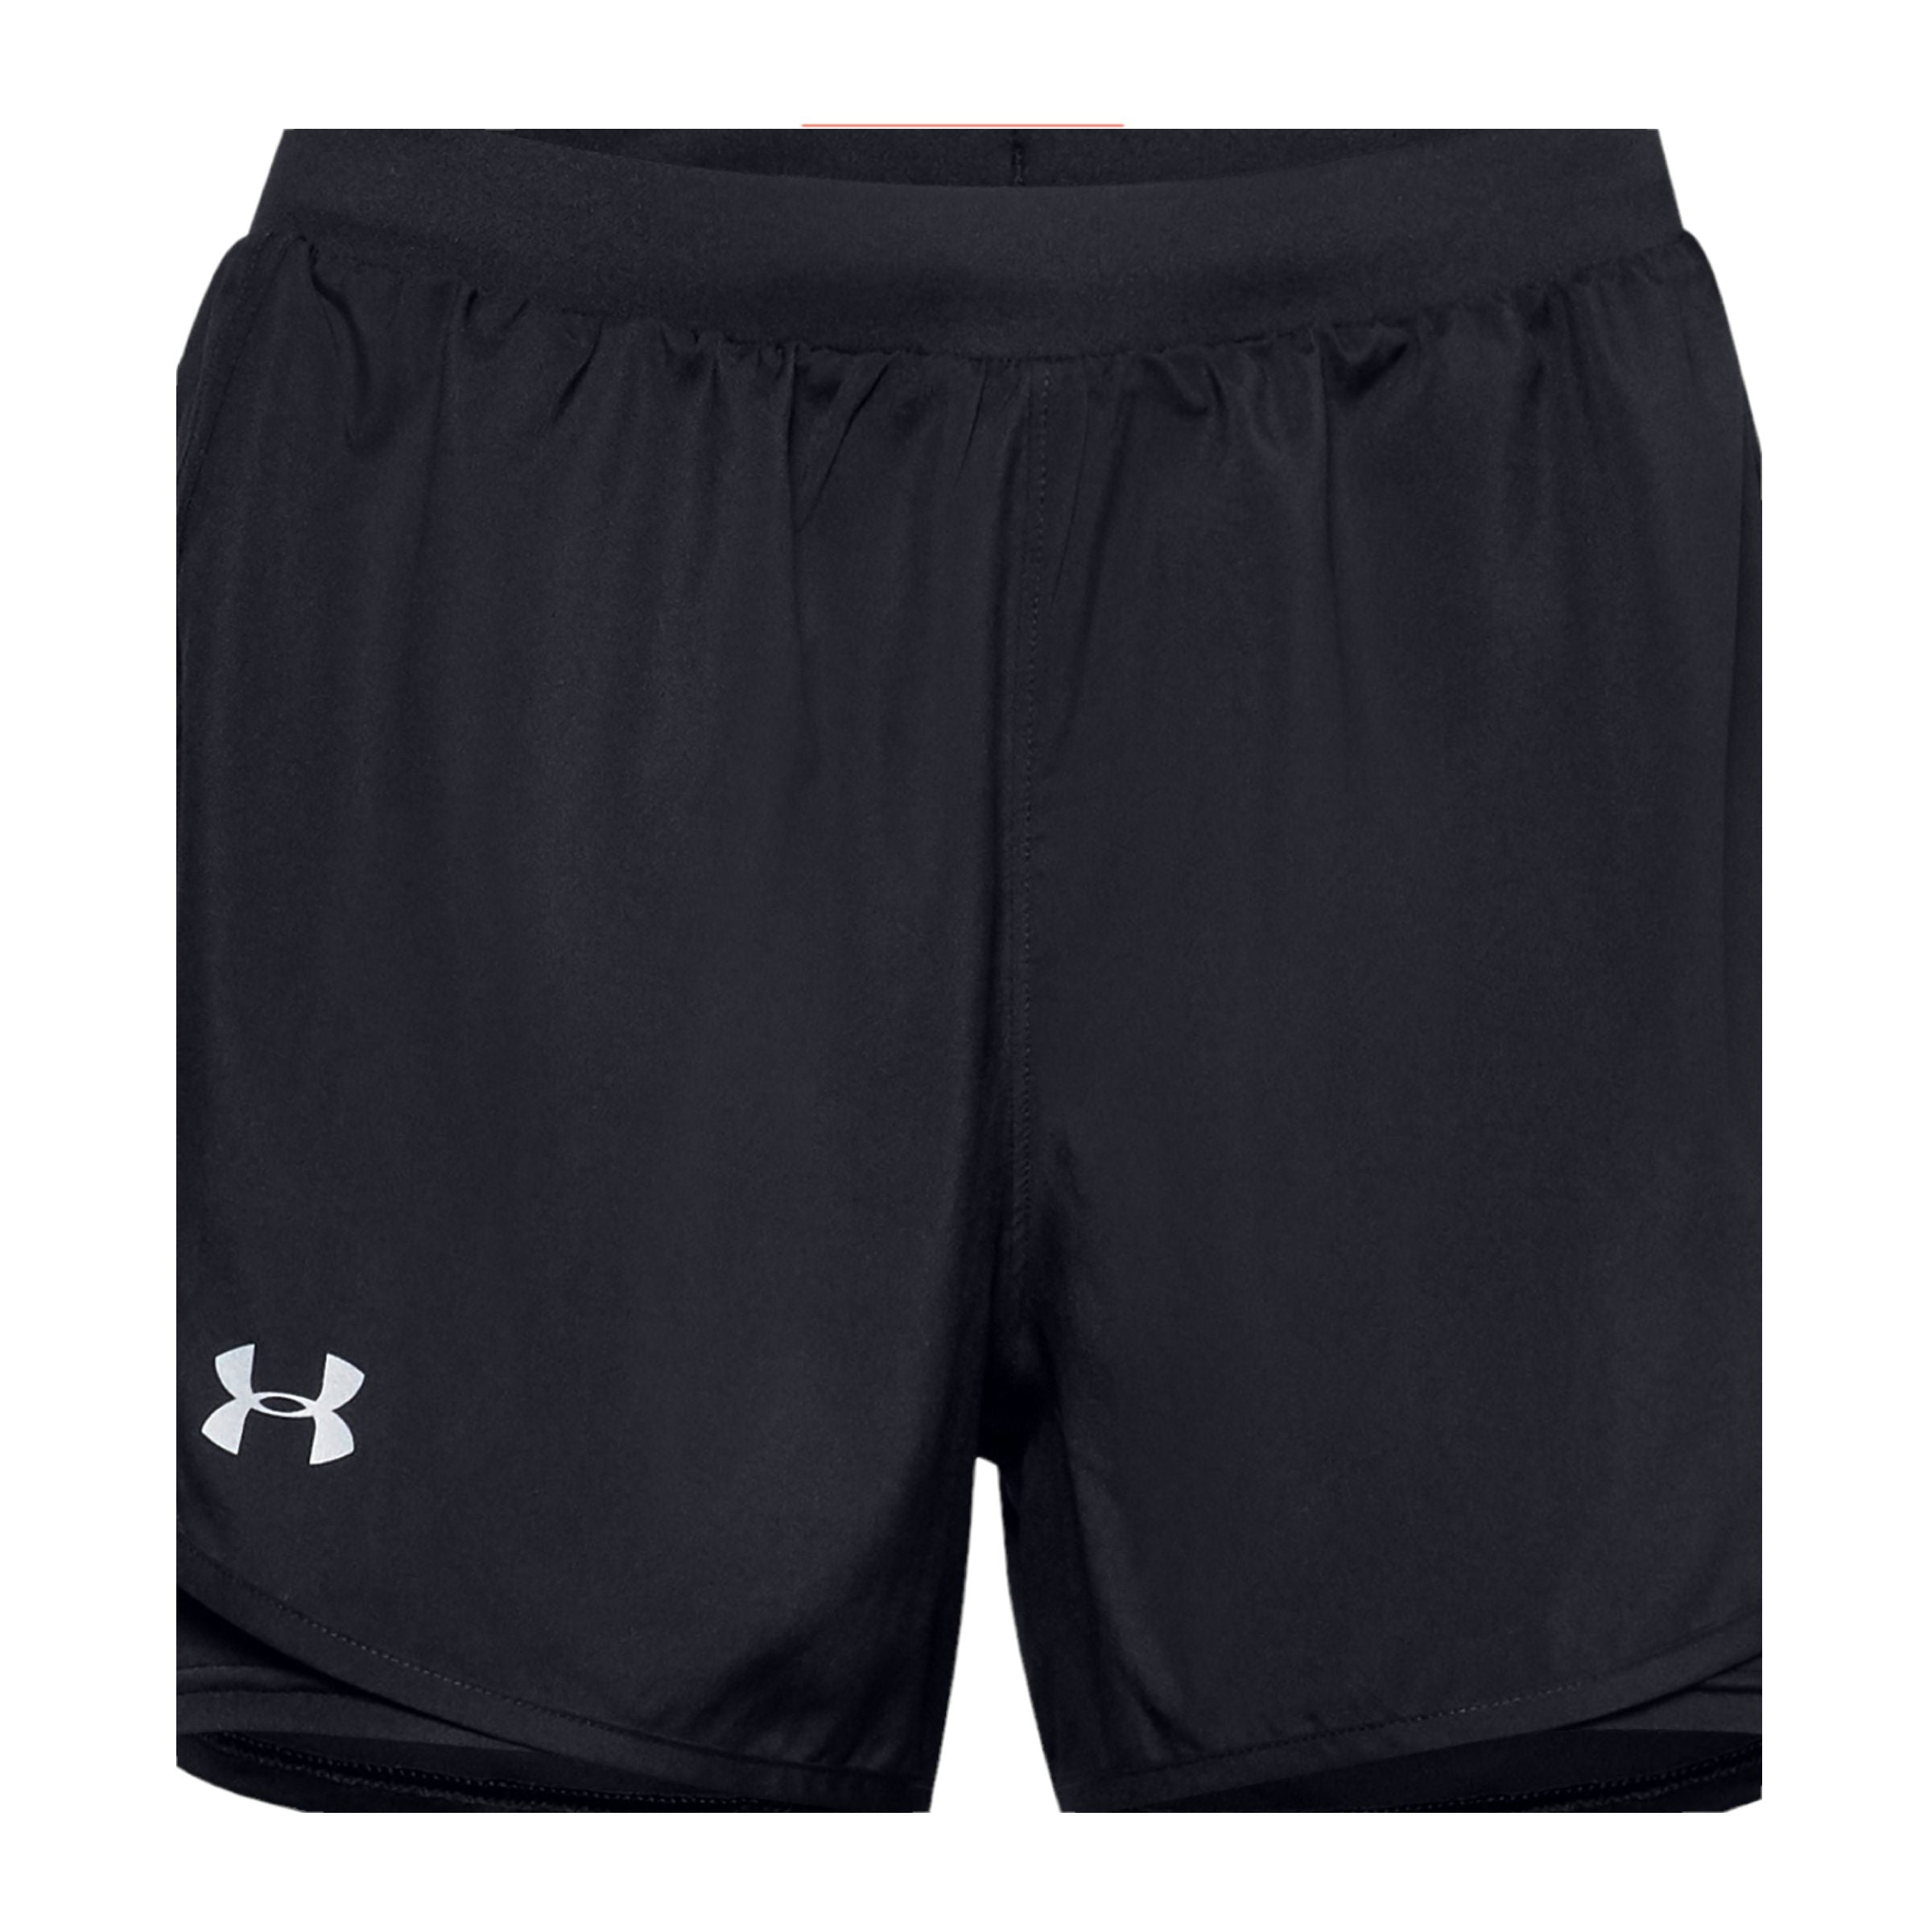 Women's Fly-By 2.0 2-in-1 Shorts Black/Reflective 